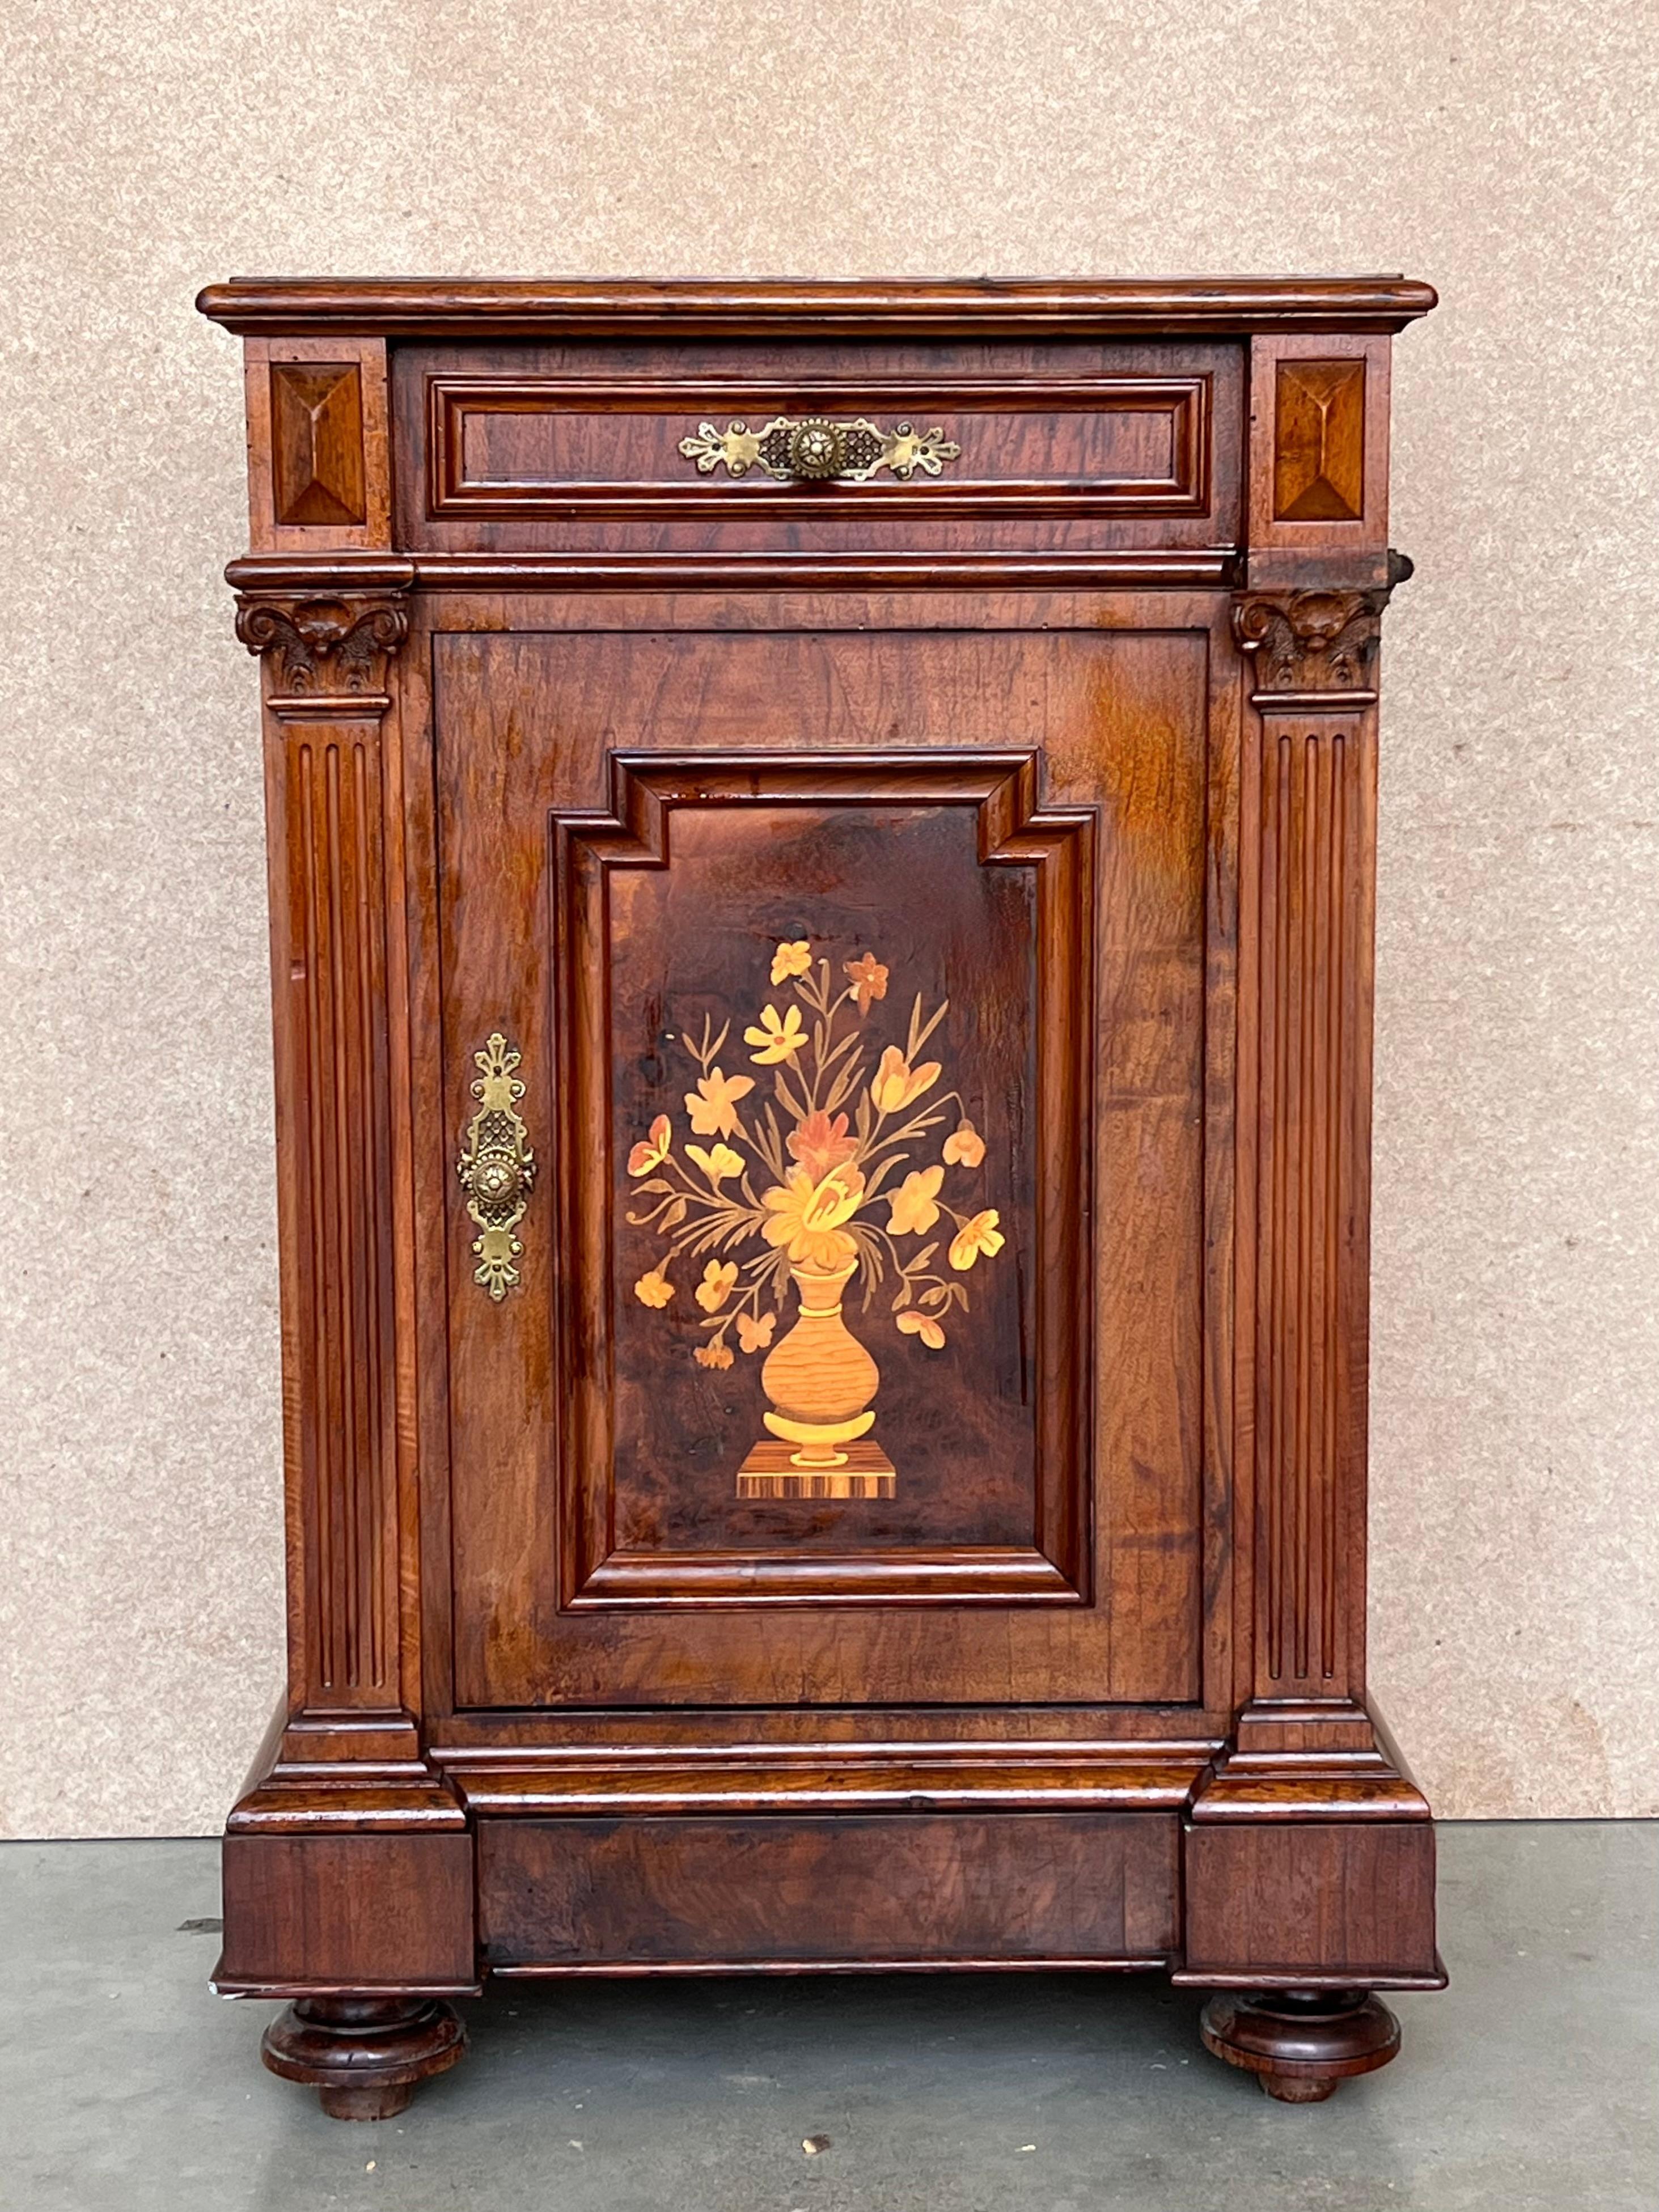 19th Century French walnut neoclassical file cabinet is truly an unusual find! Appearing to be, at first glance, a large nightstands, features a single exterior drawer above a cabinet that opens to reveal an interior ceramic compartment. The